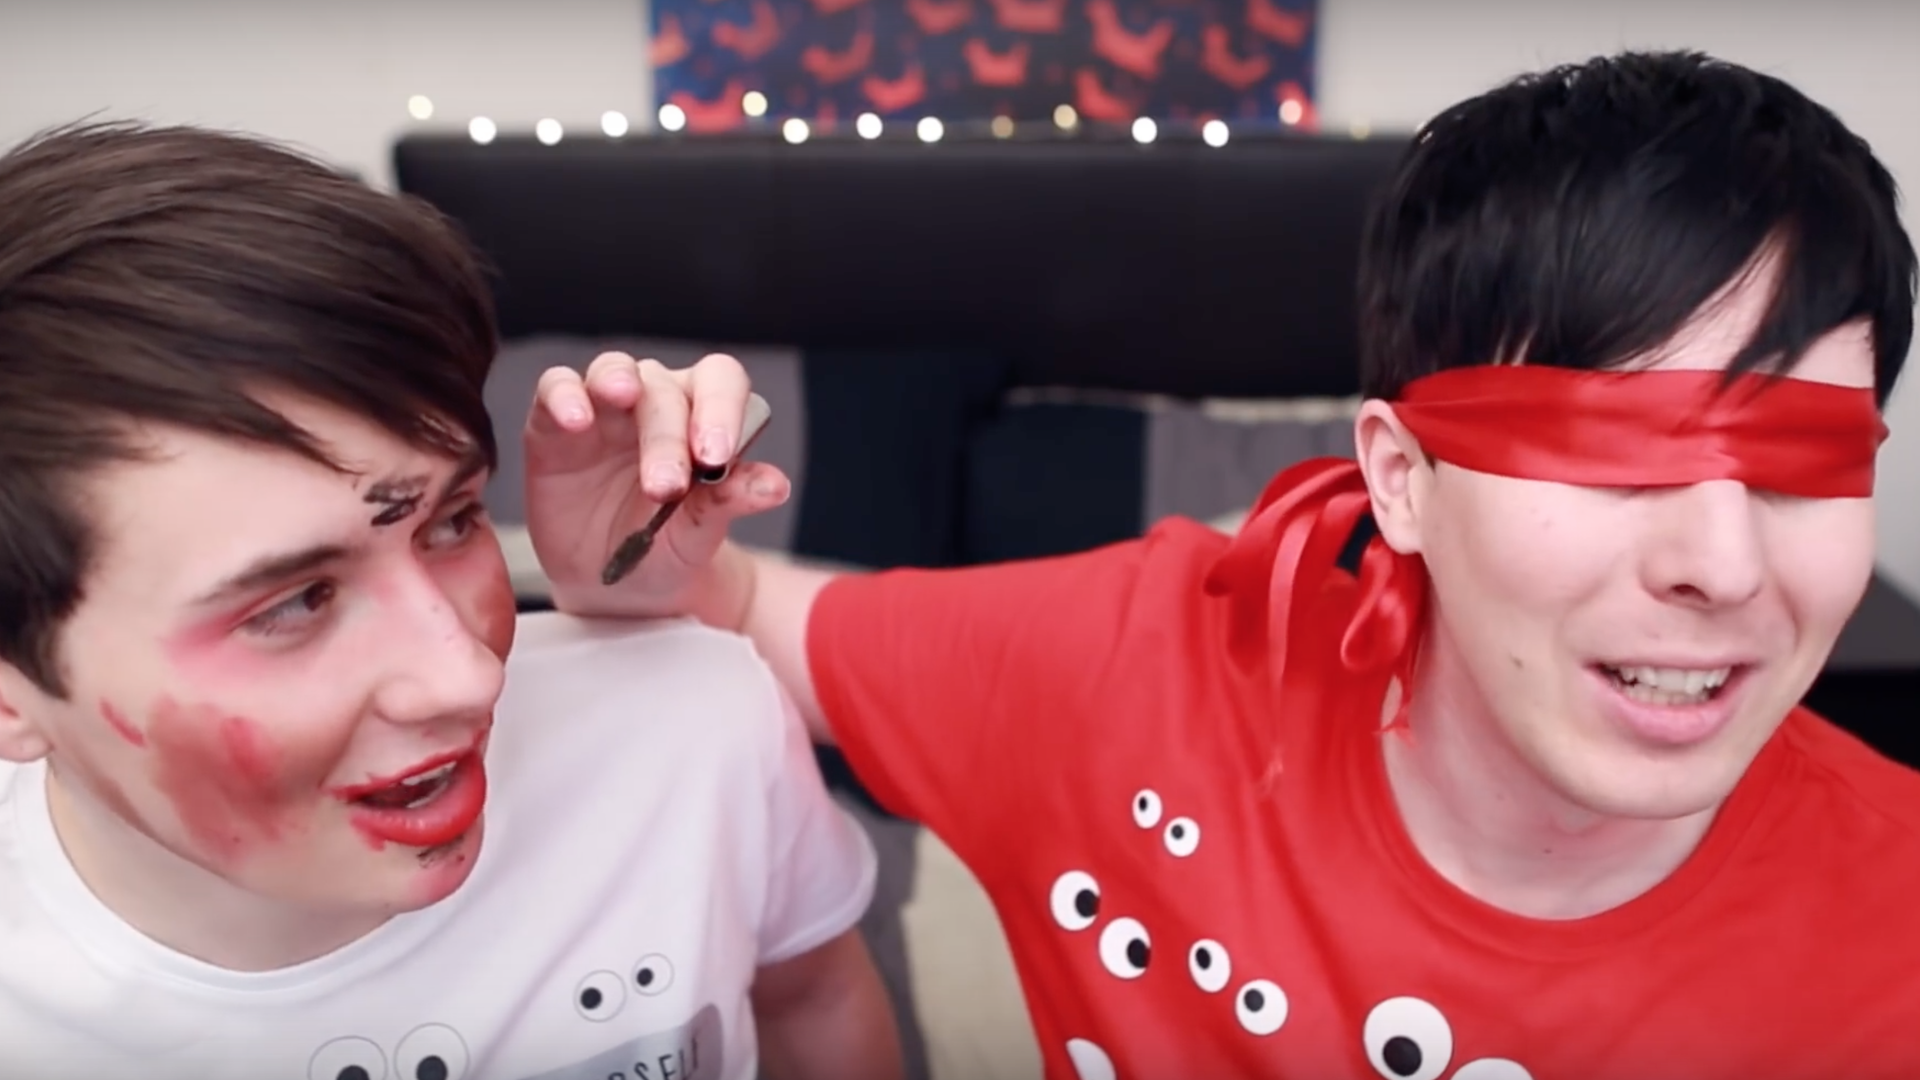 Dan and Phil do the blindfolded make-up challenge